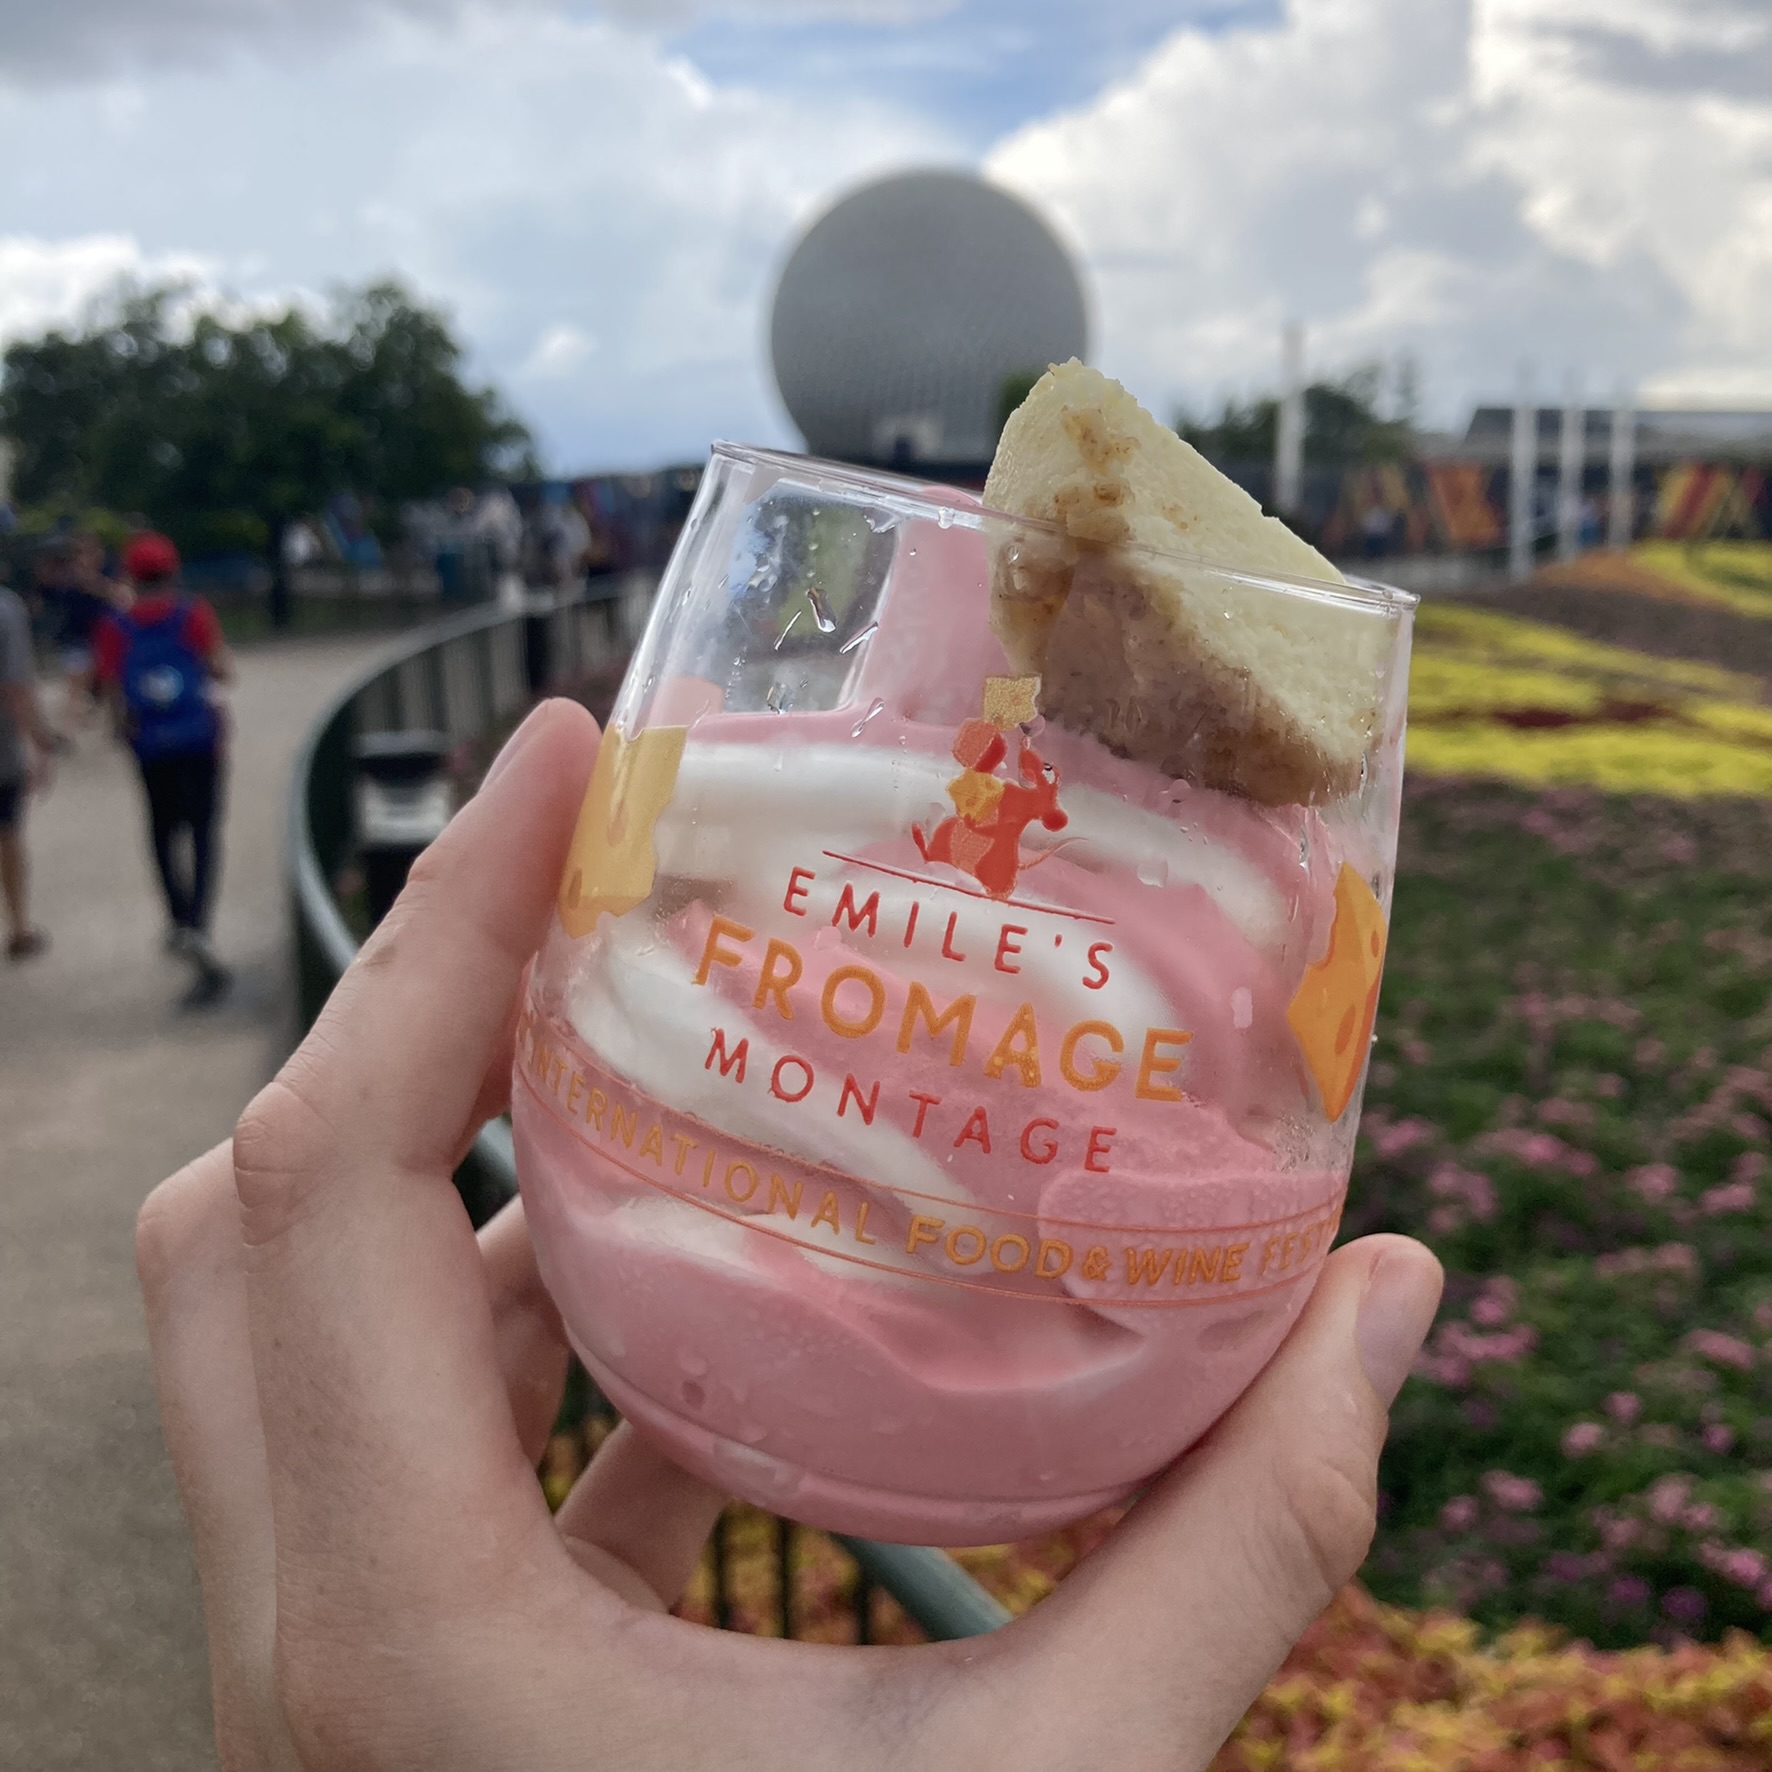 Emile’s Fromage Montage at Epcot’s International Food & Wine Festival 2022: Cheesin’ Our Way Around the World